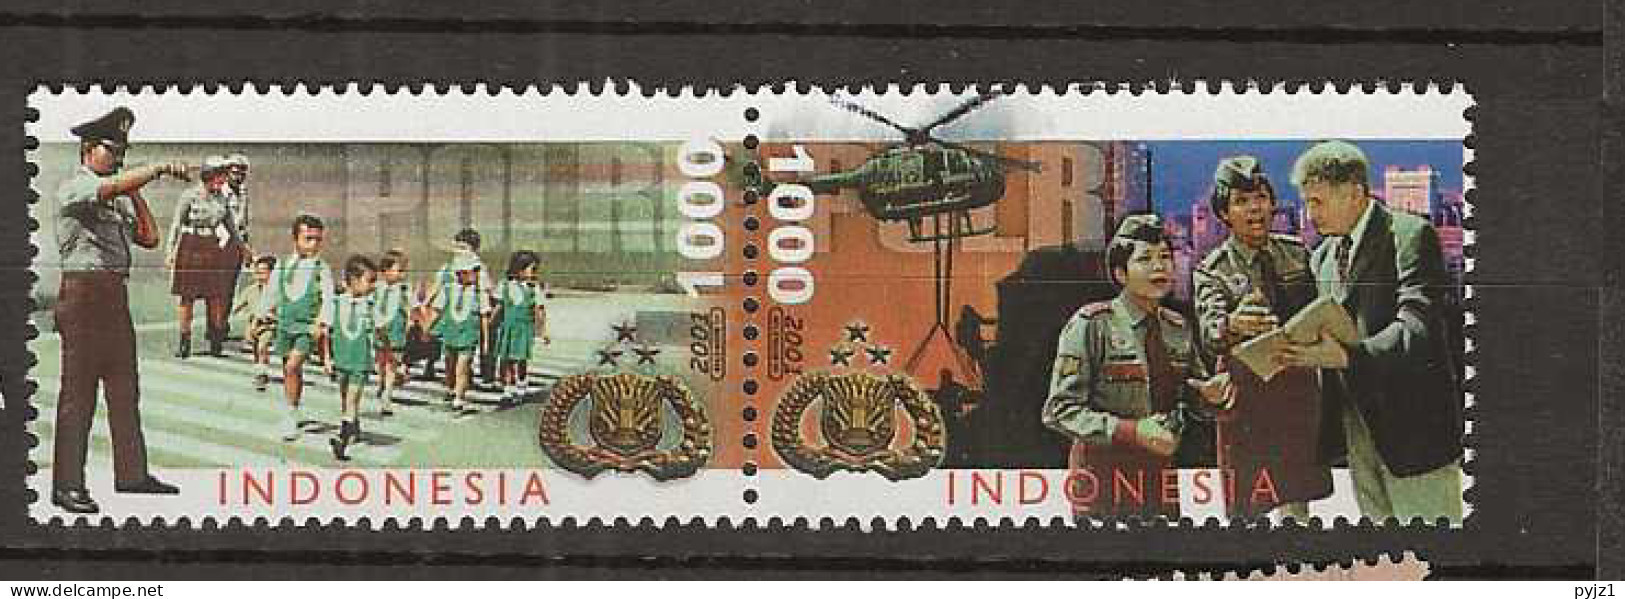 2001 MNH Indonesia ZBL 2195-96 Postfris** - Indonesia